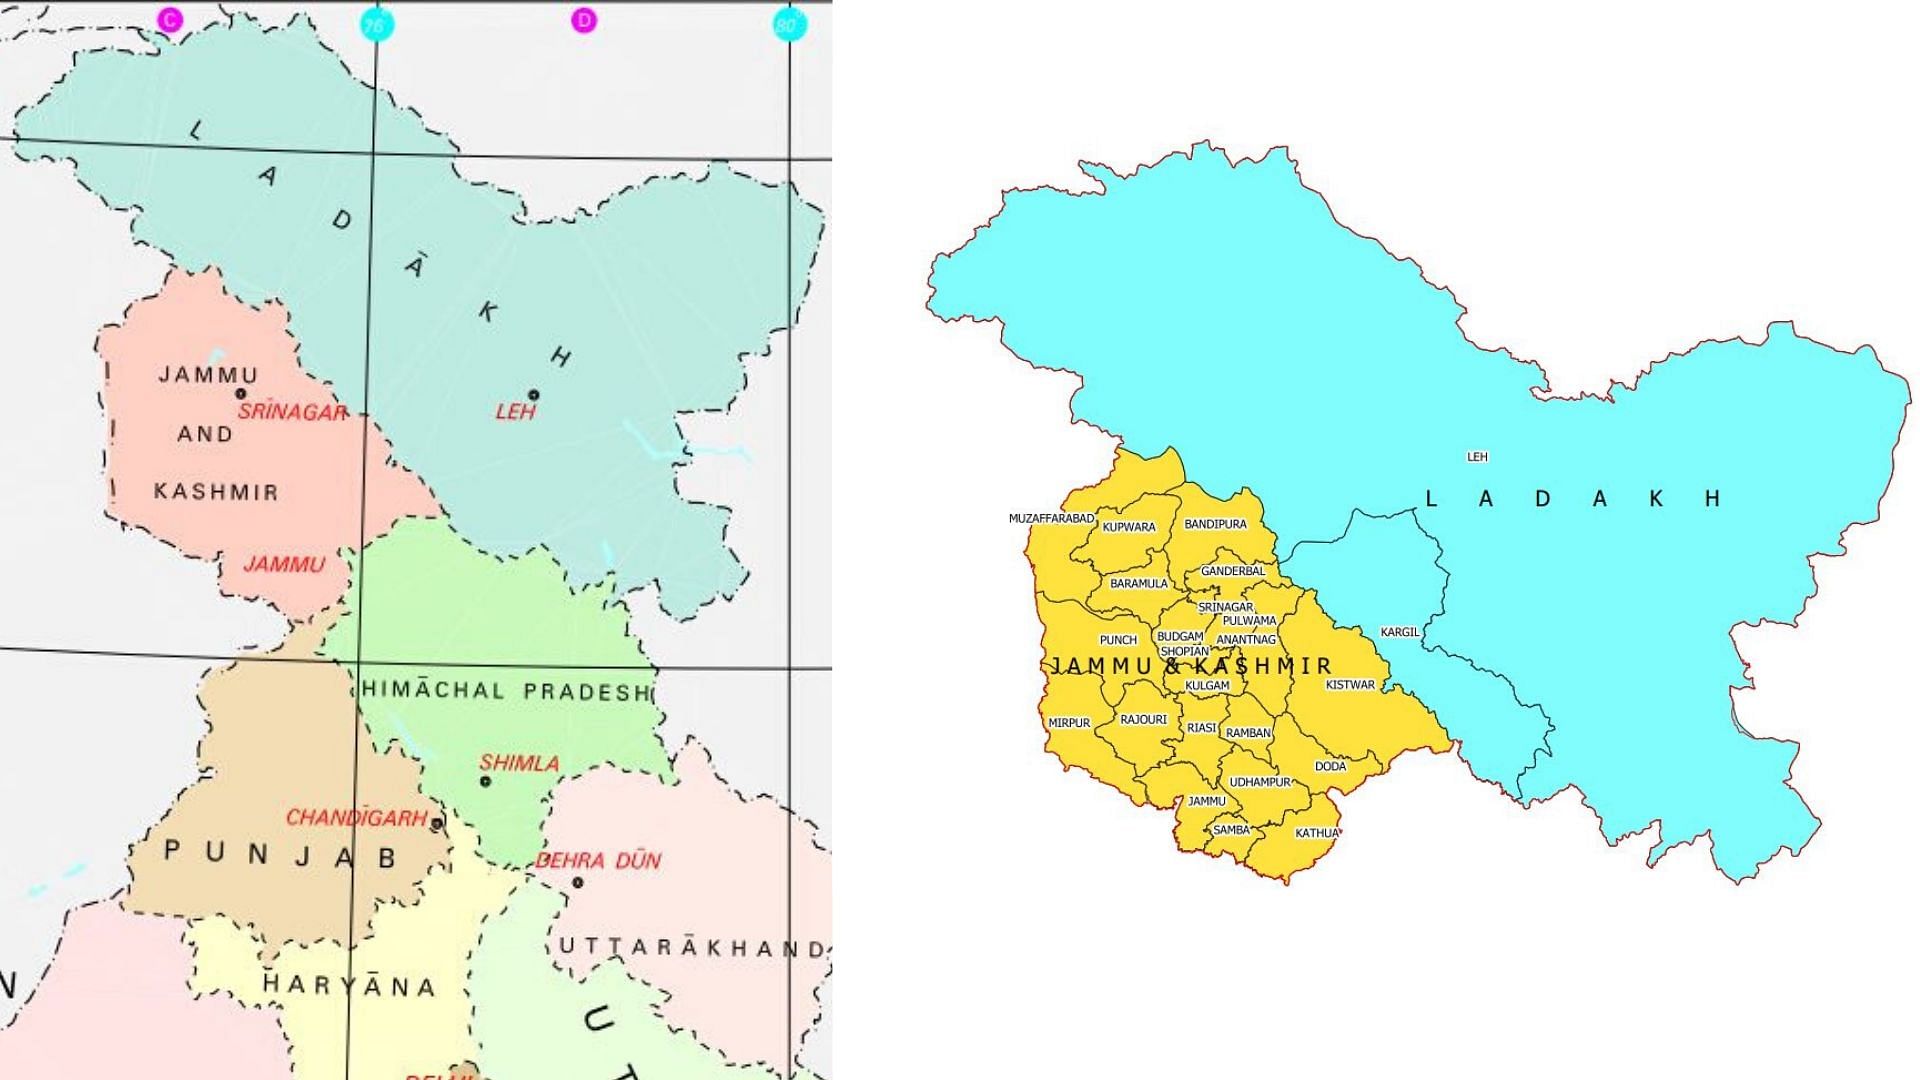 ladakh and kerala in india map India Gets A New Map Boundary Of Uts Of J K And Ladakh Declared ladakh and kerala in india map